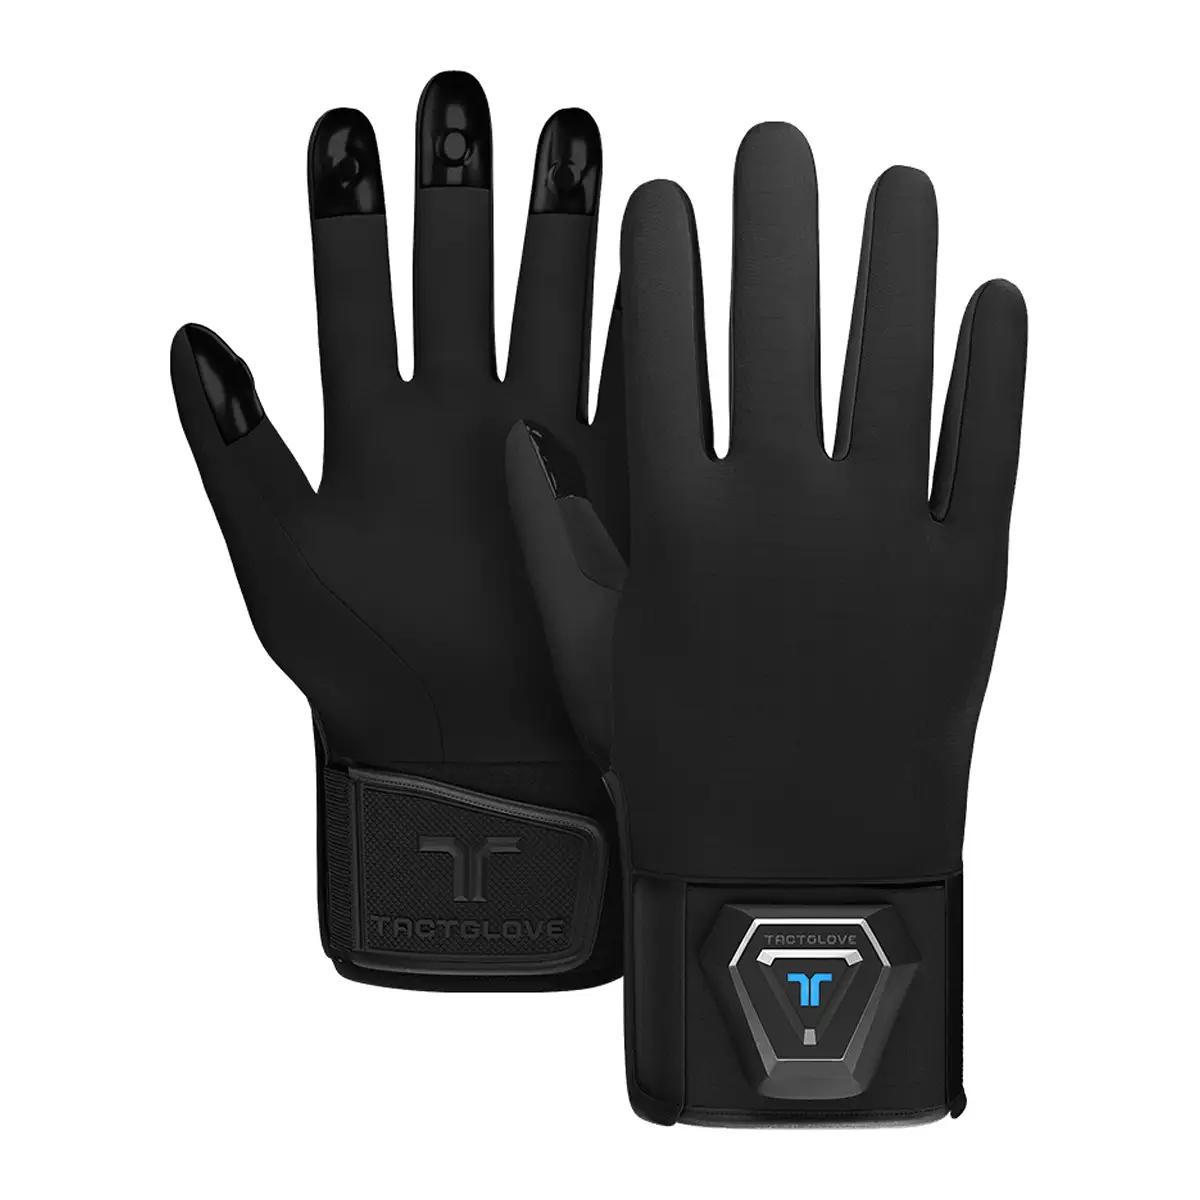 TactGlove DK1 Wireless Haptic Gloves VR | Knoxlabs VR Marketplace